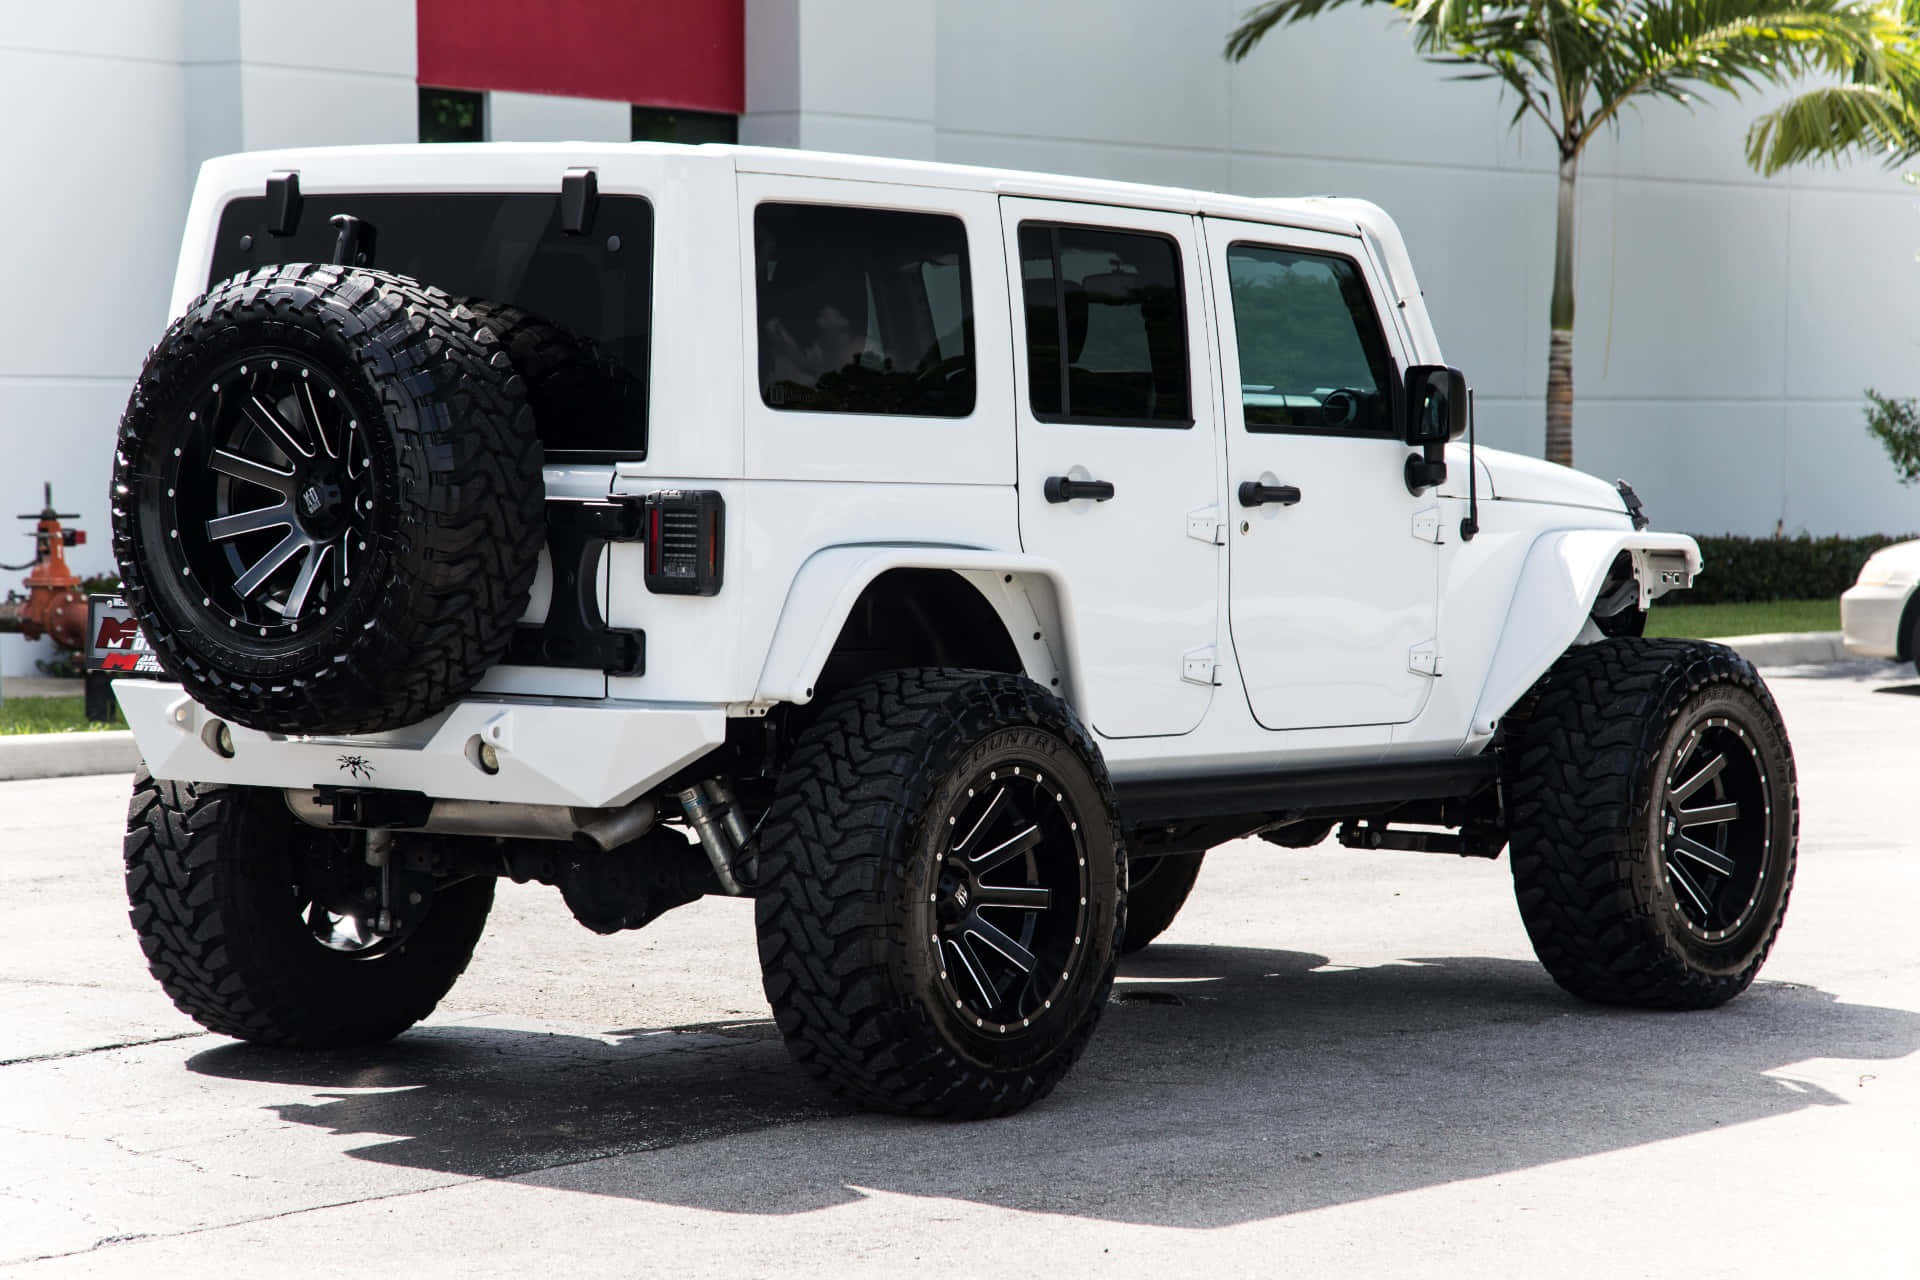 Explore the outdoors in the iconic Jeep Wrangler